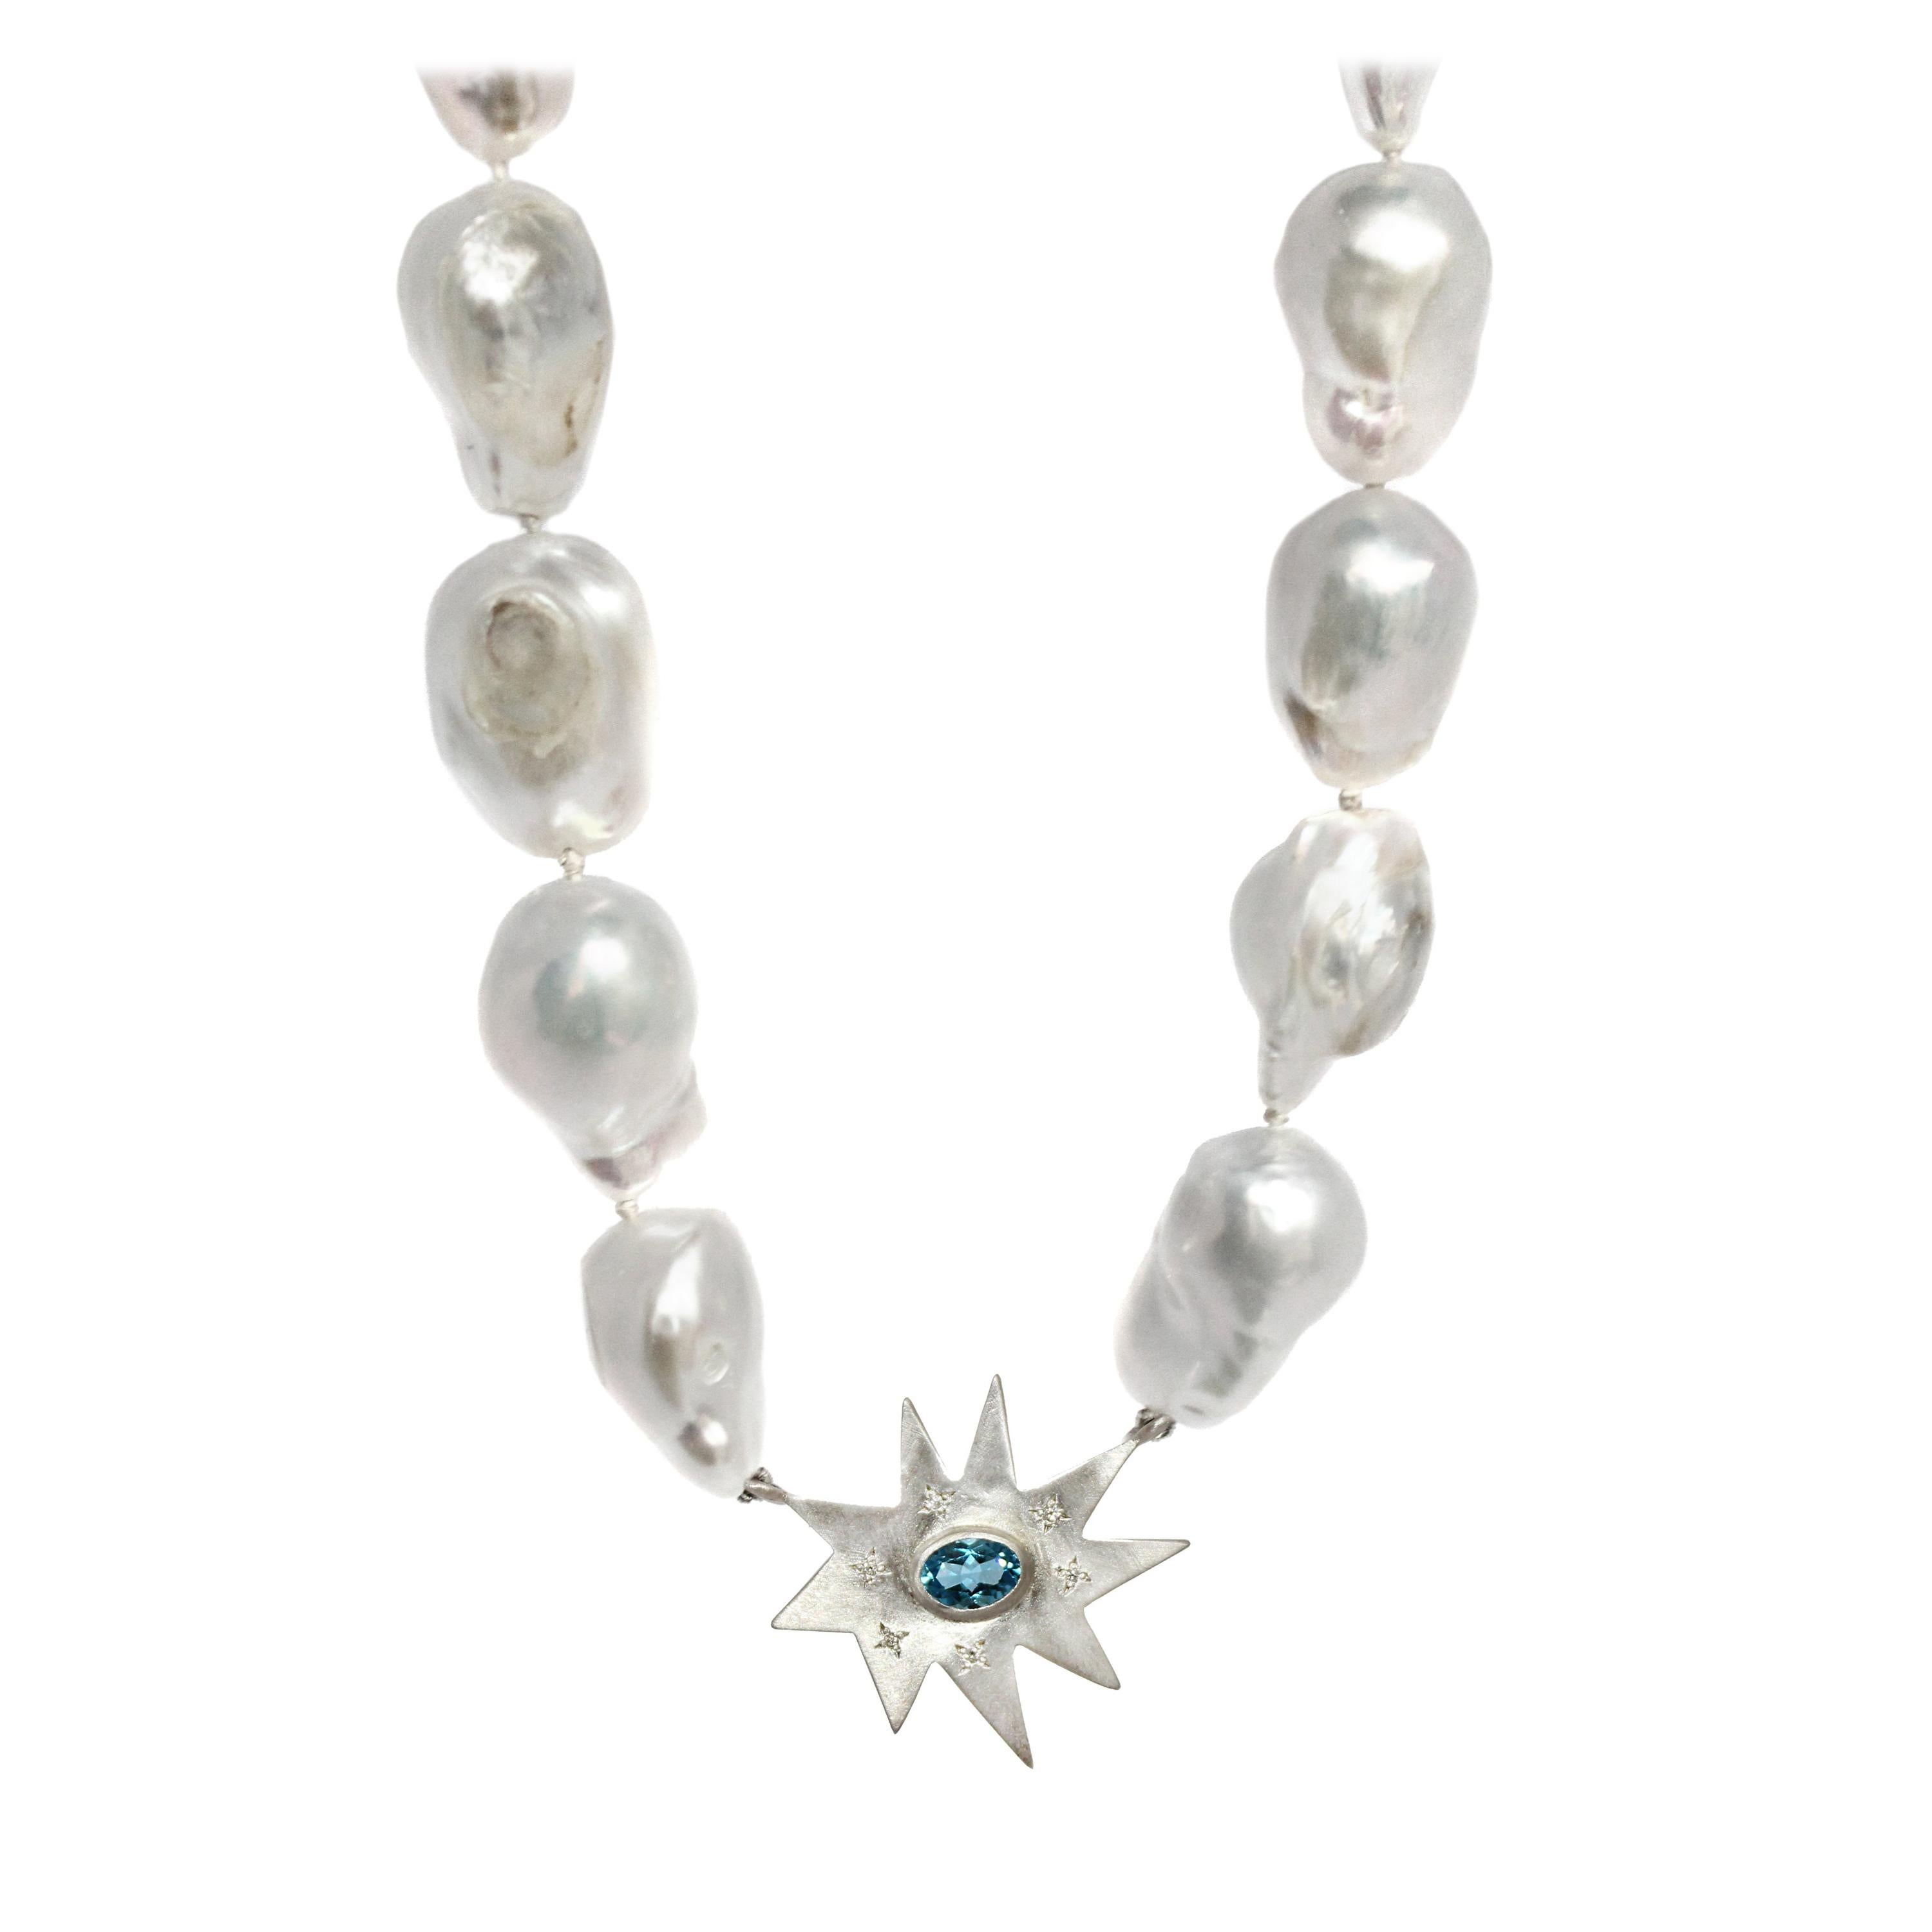 Emily Kuvin Baroque Pearl Necklace with Diamonds, Blue Topaz